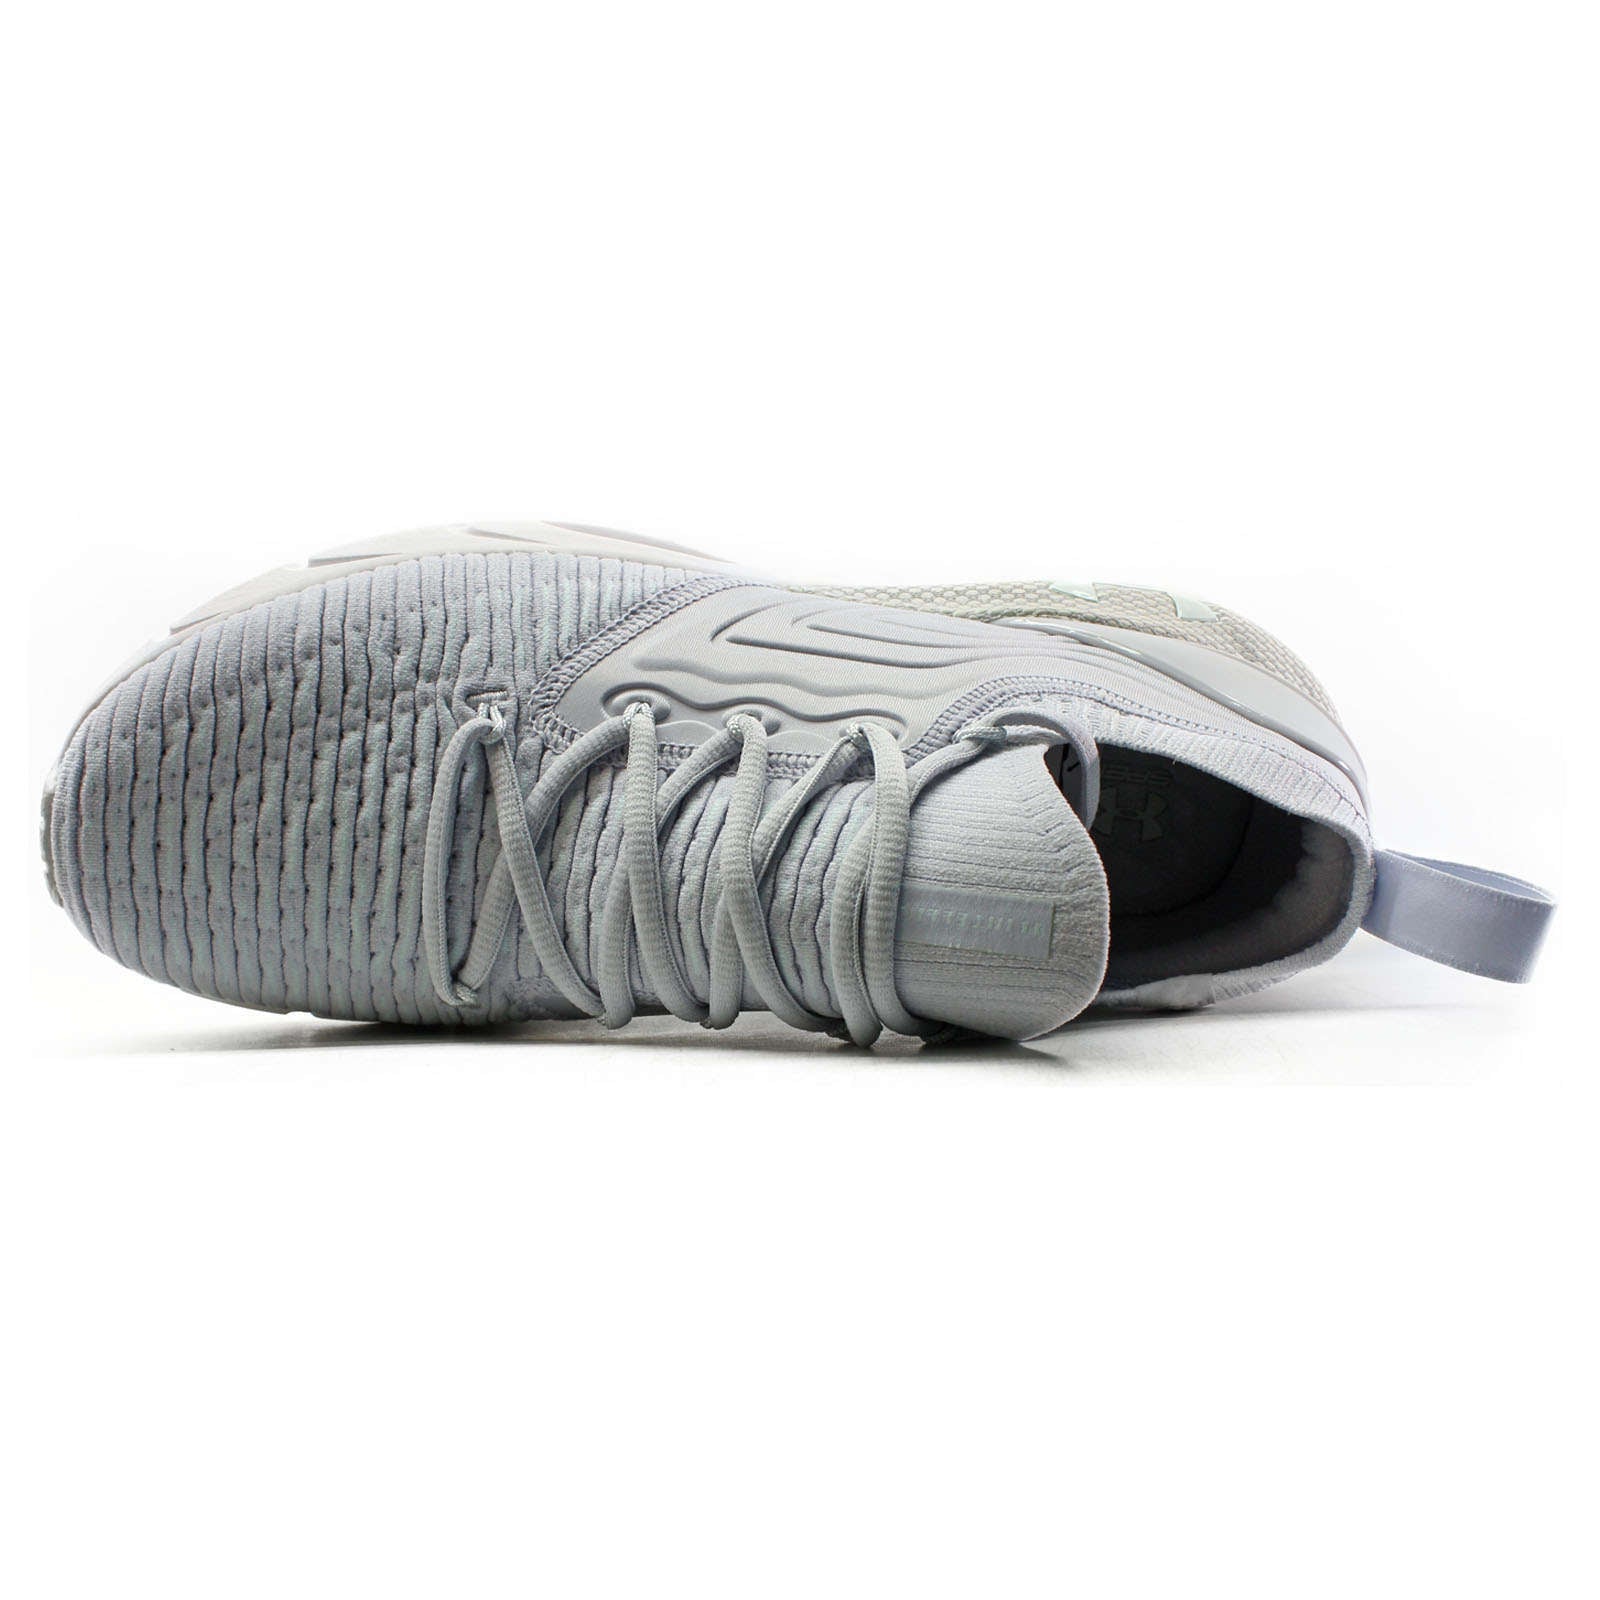 Under Armour HOVR Phantom 2 INKNT Synthetic Textile Women's Low-Top Trainers#color_grey white